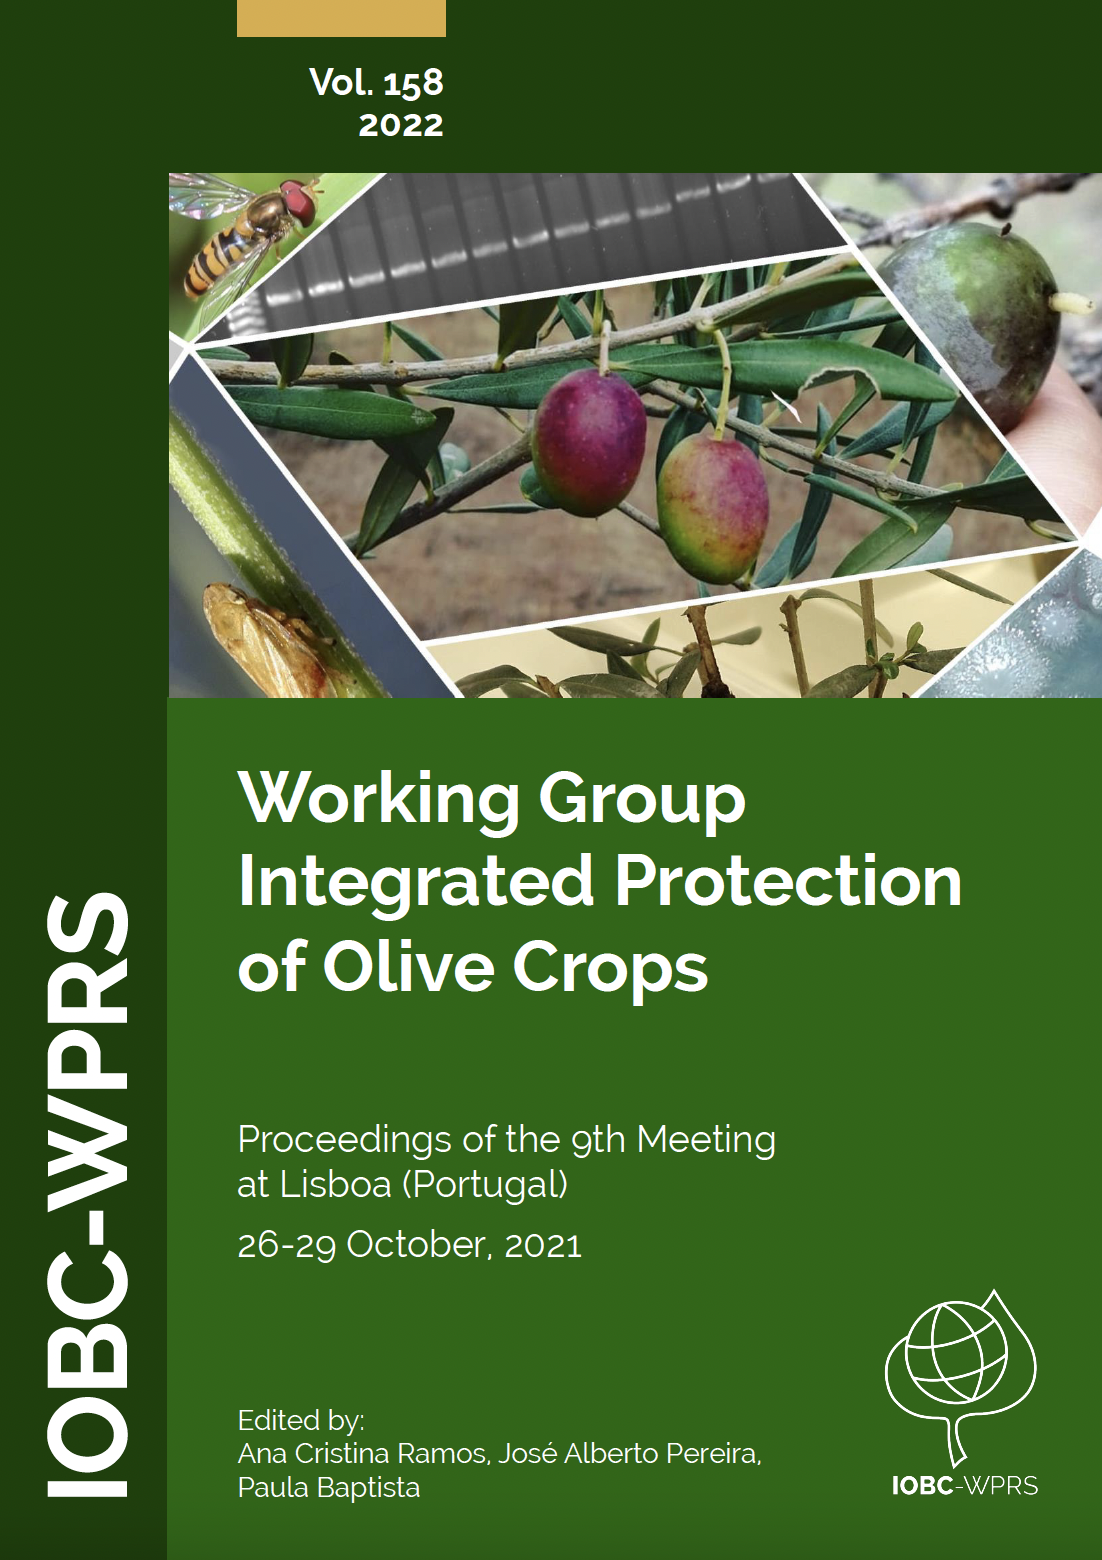 New Bulletin: Integrated Protection of Olive Crops